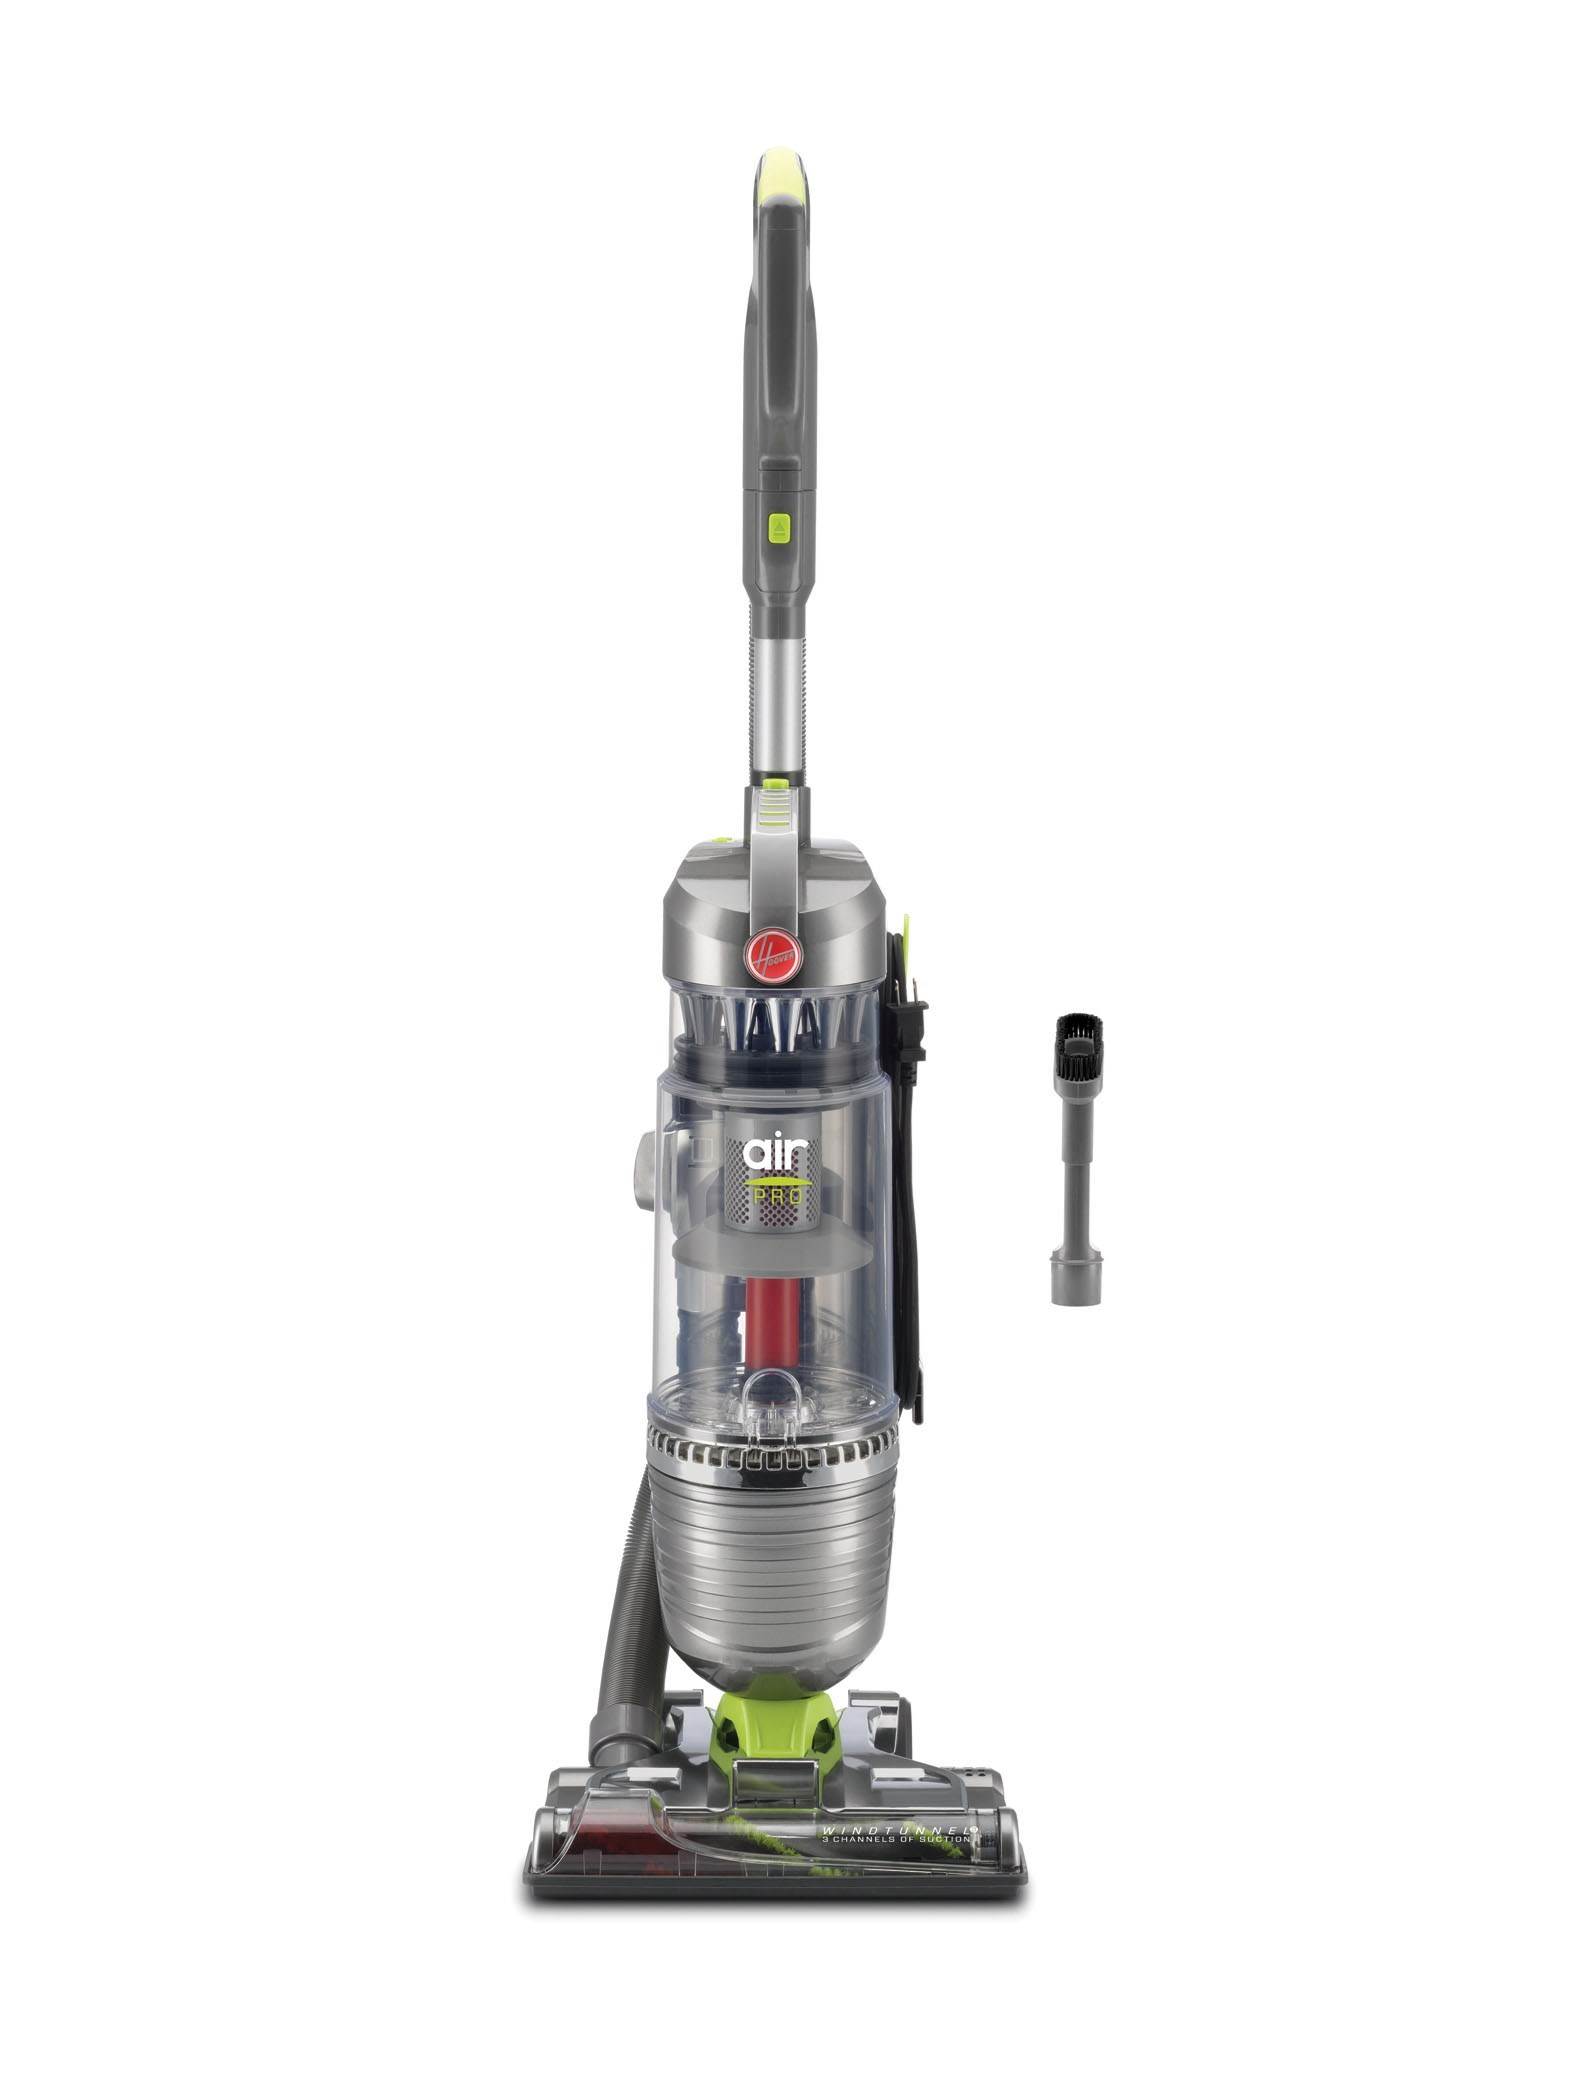 Hoover Air Pro Lightweight Bagless Upright Vacuum Carpet Cleaner, UH72450 - image 4 of 12